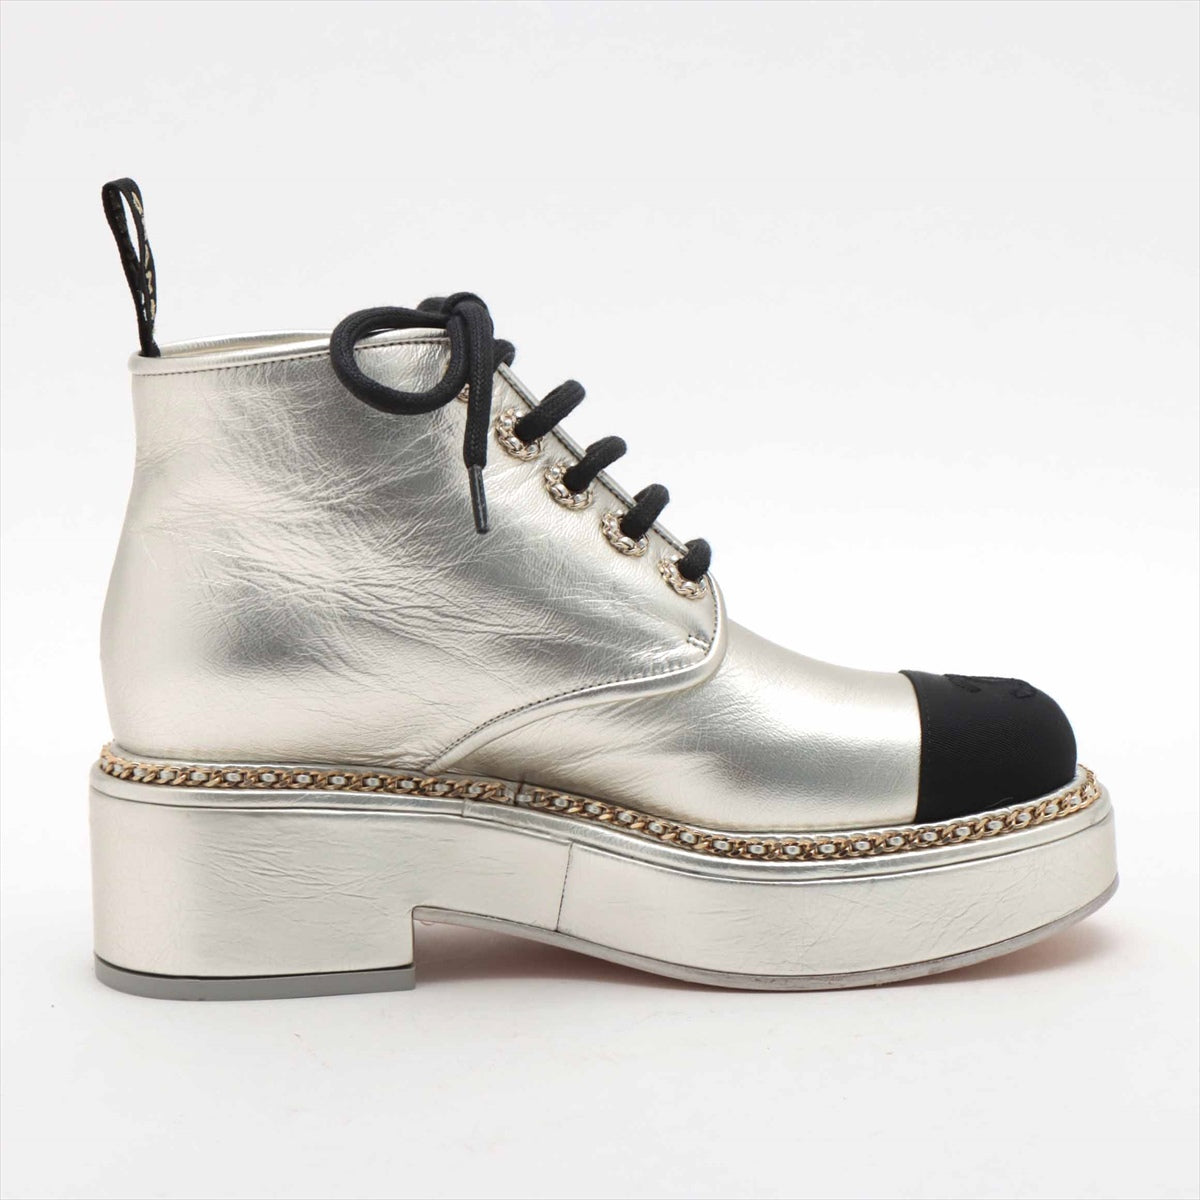 Chanel Coco Mark 21P Patent leather Short Boots 36C Ladies' Silver G35367 Chain There is a box